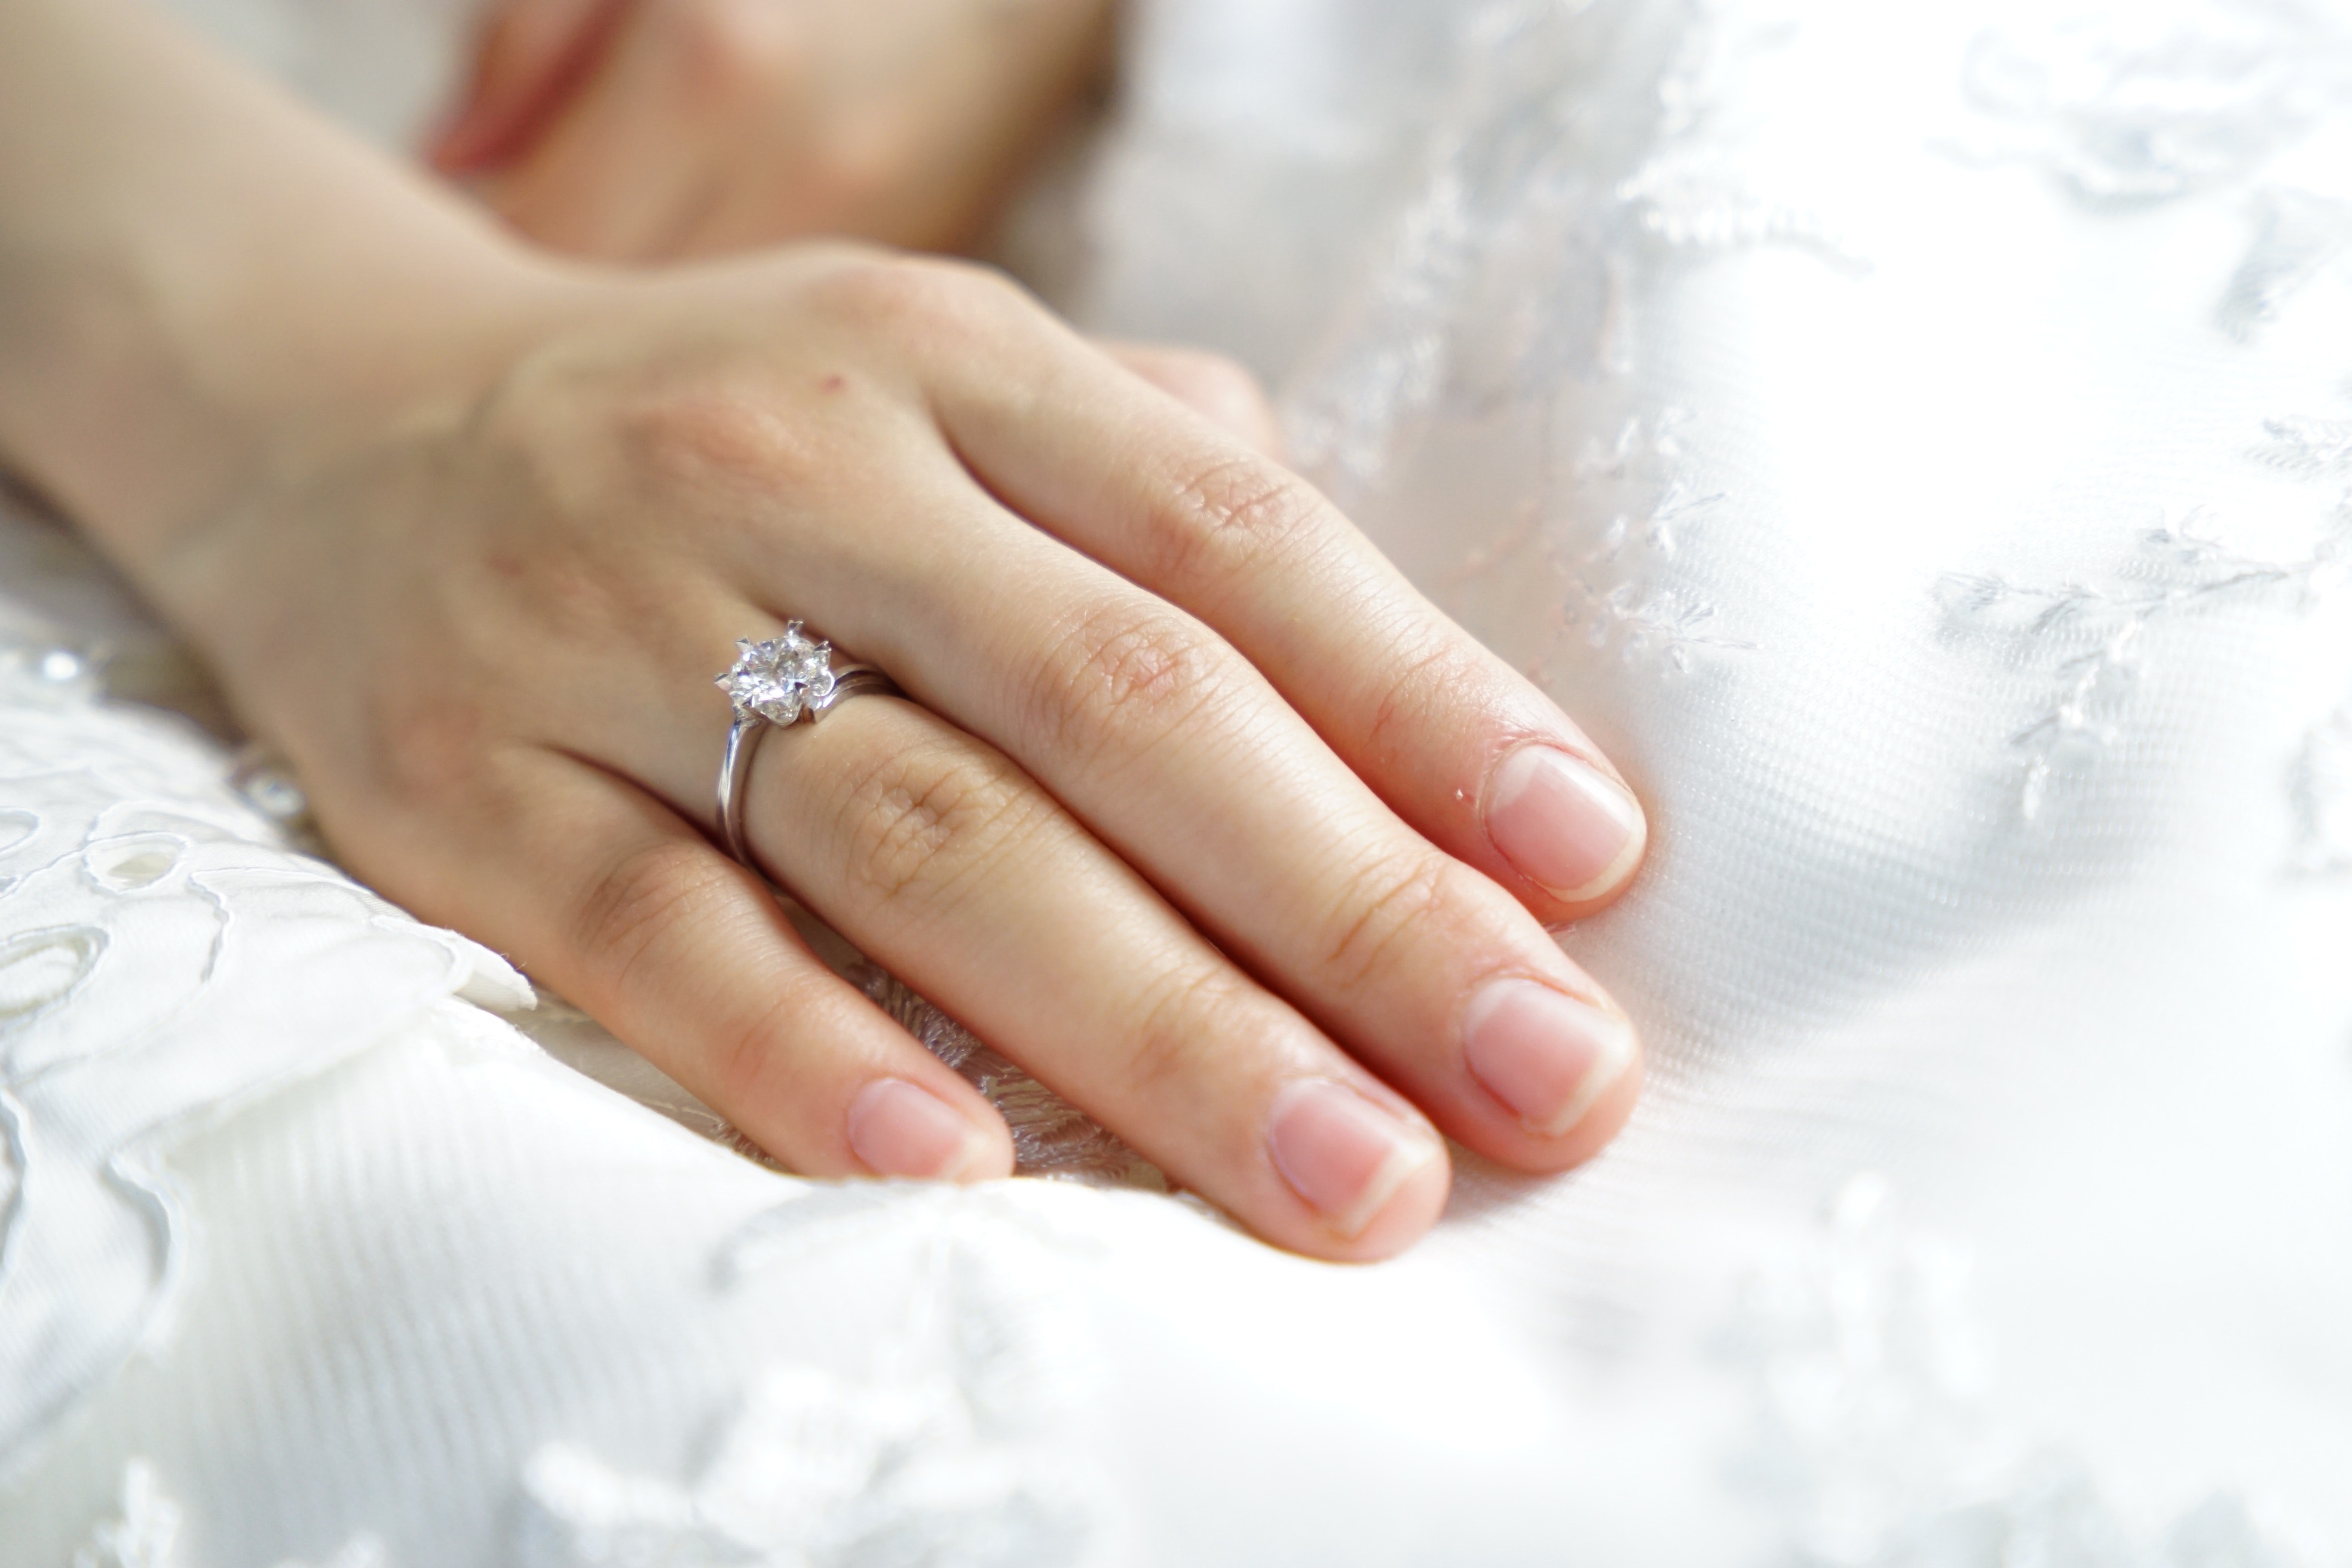 A woman was in a blissful engagement until two days before her wedding. | Source: Pexels